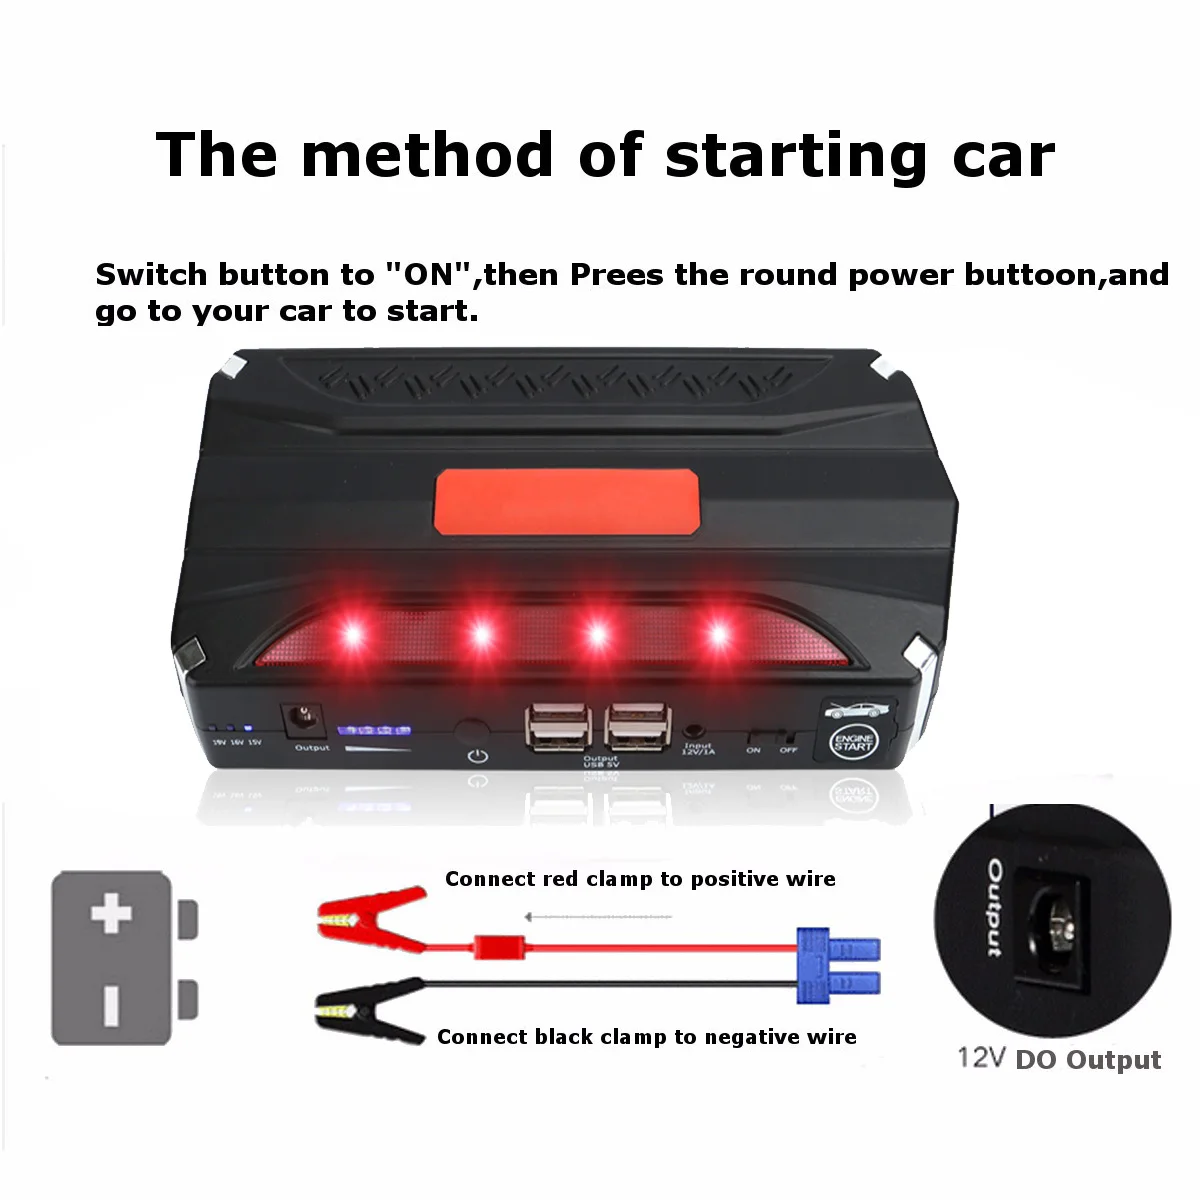 12v 69800mah car jump starter emergency start over current protected battery 4 usb power bank led w smart clip free global shipping